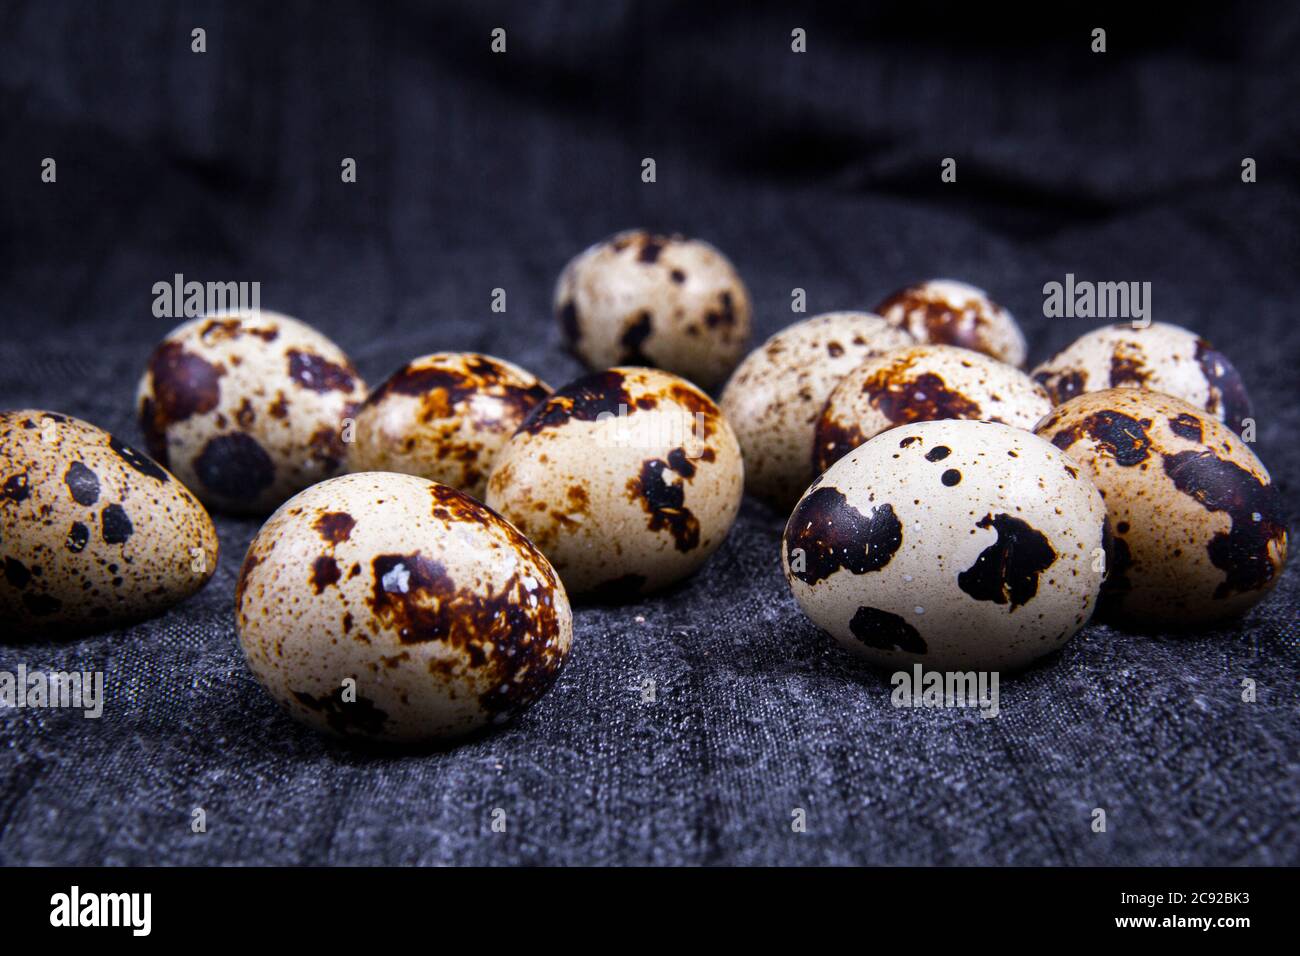 Healthy quail eggs are regularly or irregularly placed inside or outside the container. Stock Photo